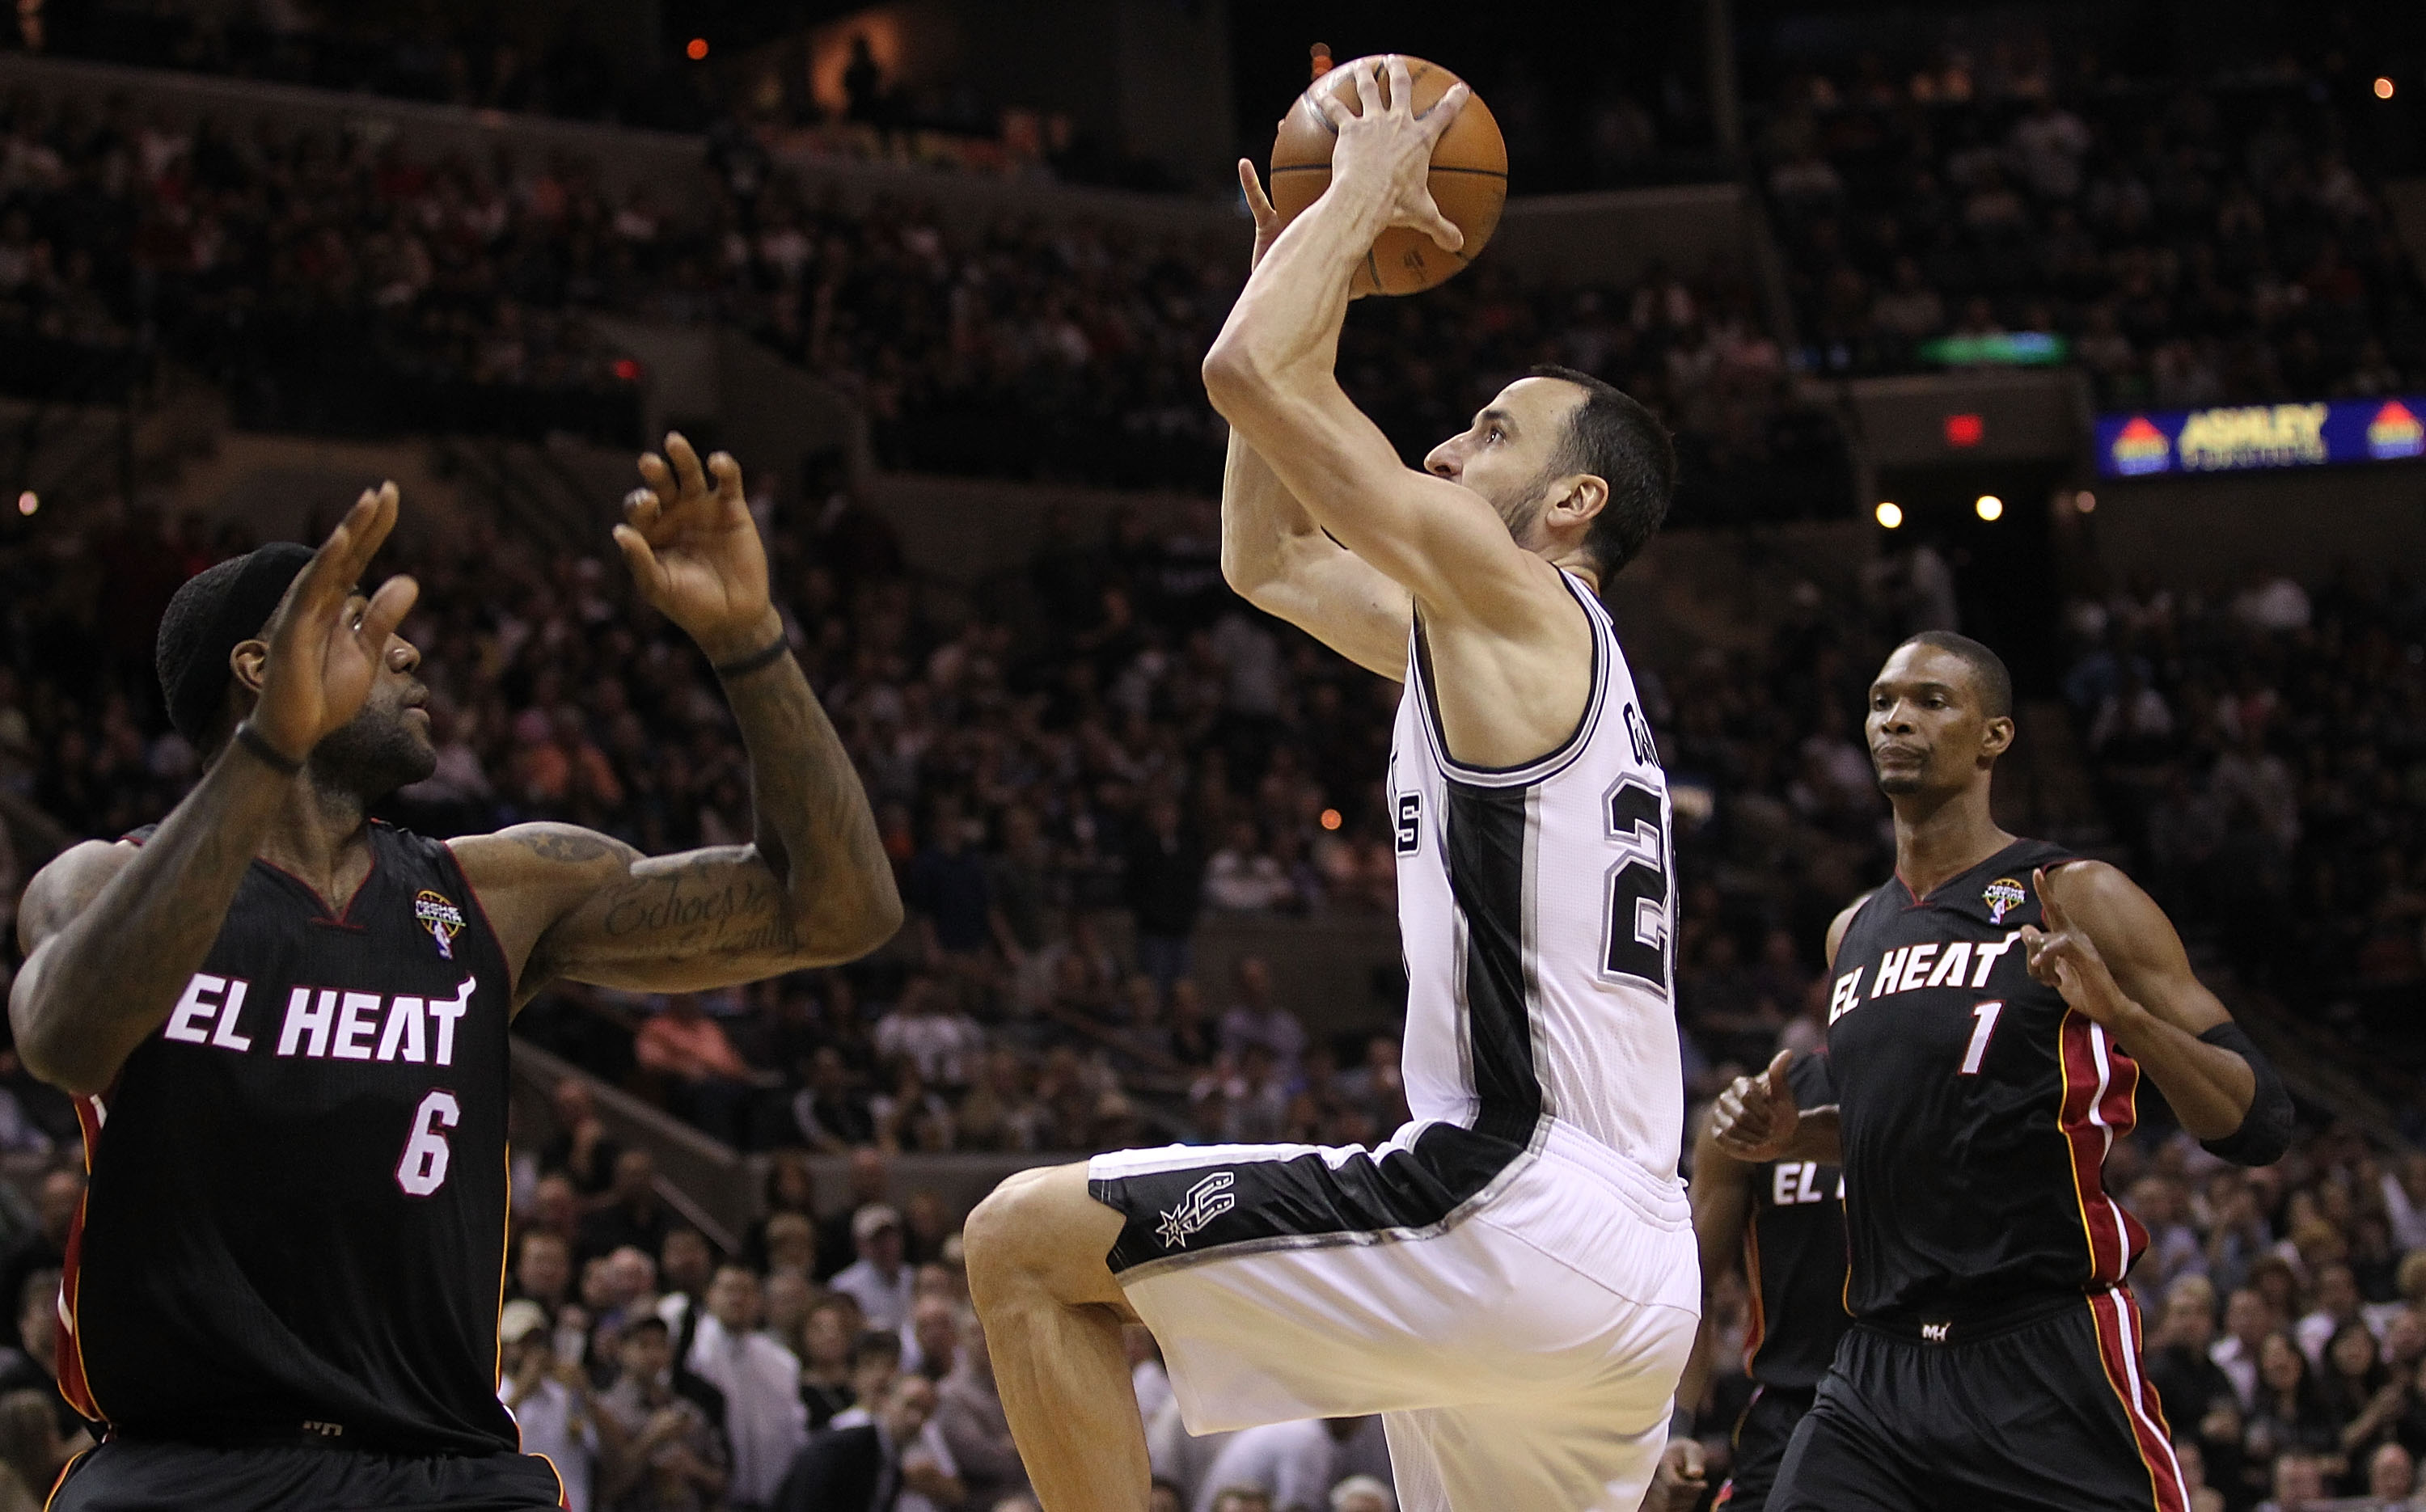 SAN ANTONIO, TX - MARCH 04:  Guard Manu Ginobili #20 of the San Antonio Spurs takes a shot against LeBron James #6 of the Miami Heat at AT&T Center on March 4, 2011 in San Antonio, Texas.   NOTE TO USER: User expressly acknowledges and agrees that, by dow